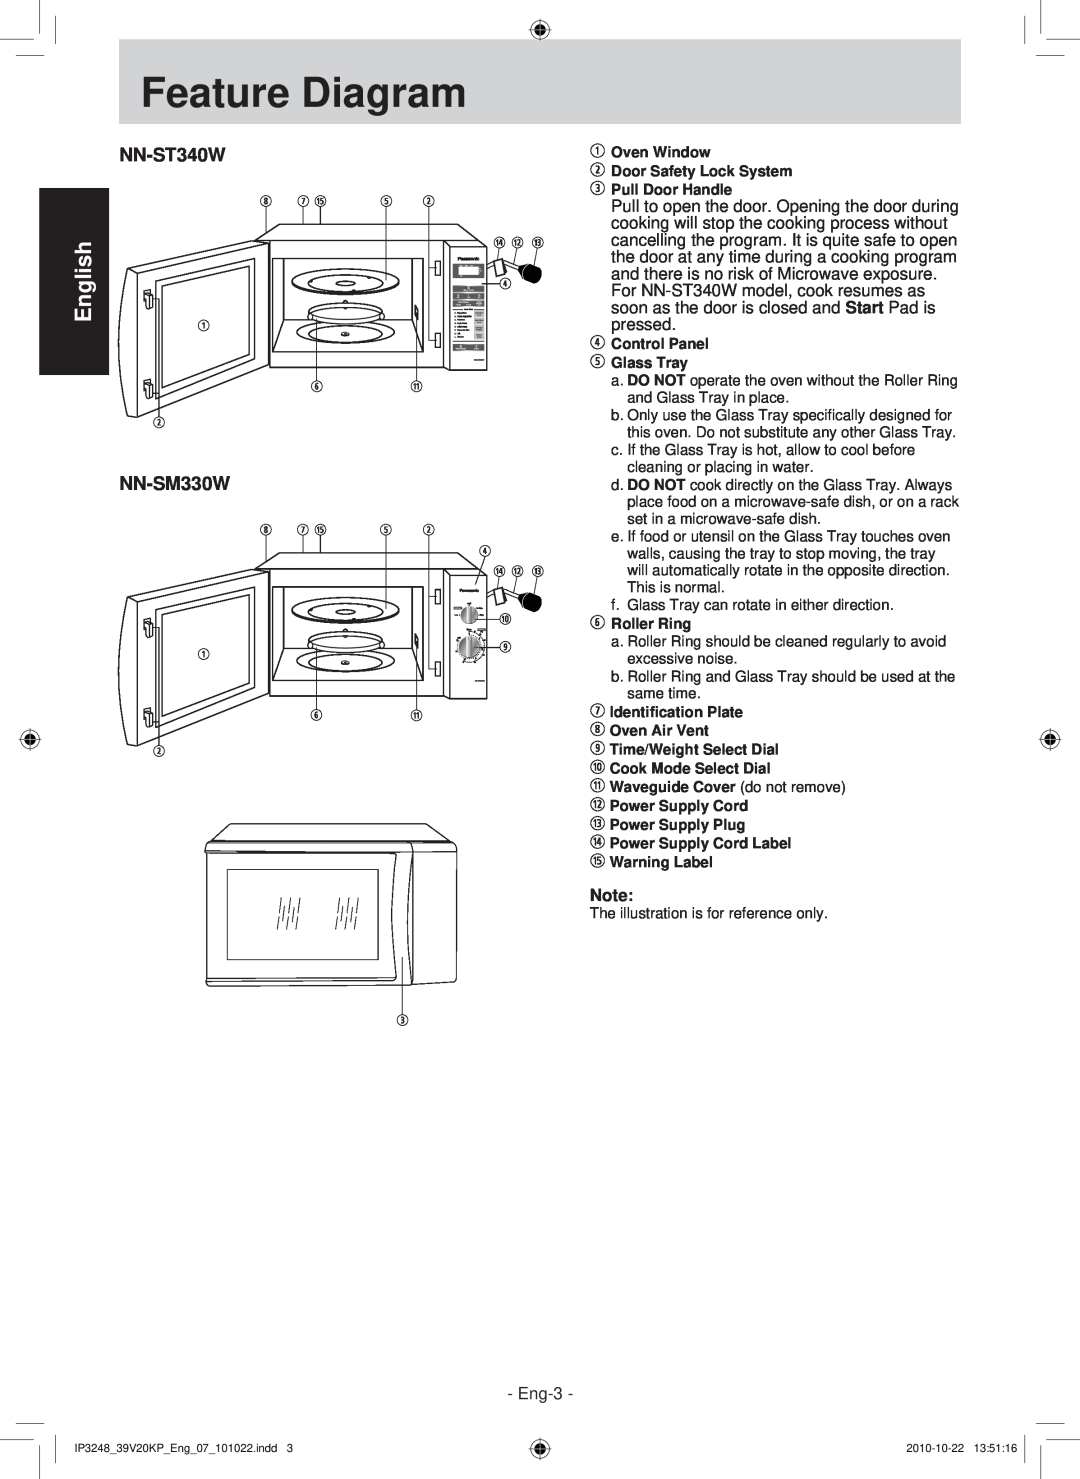 Panasonic Feature Diagram, cooking will stop the cooking process without, For NN-ST340W model, cook resumes as, pressed 